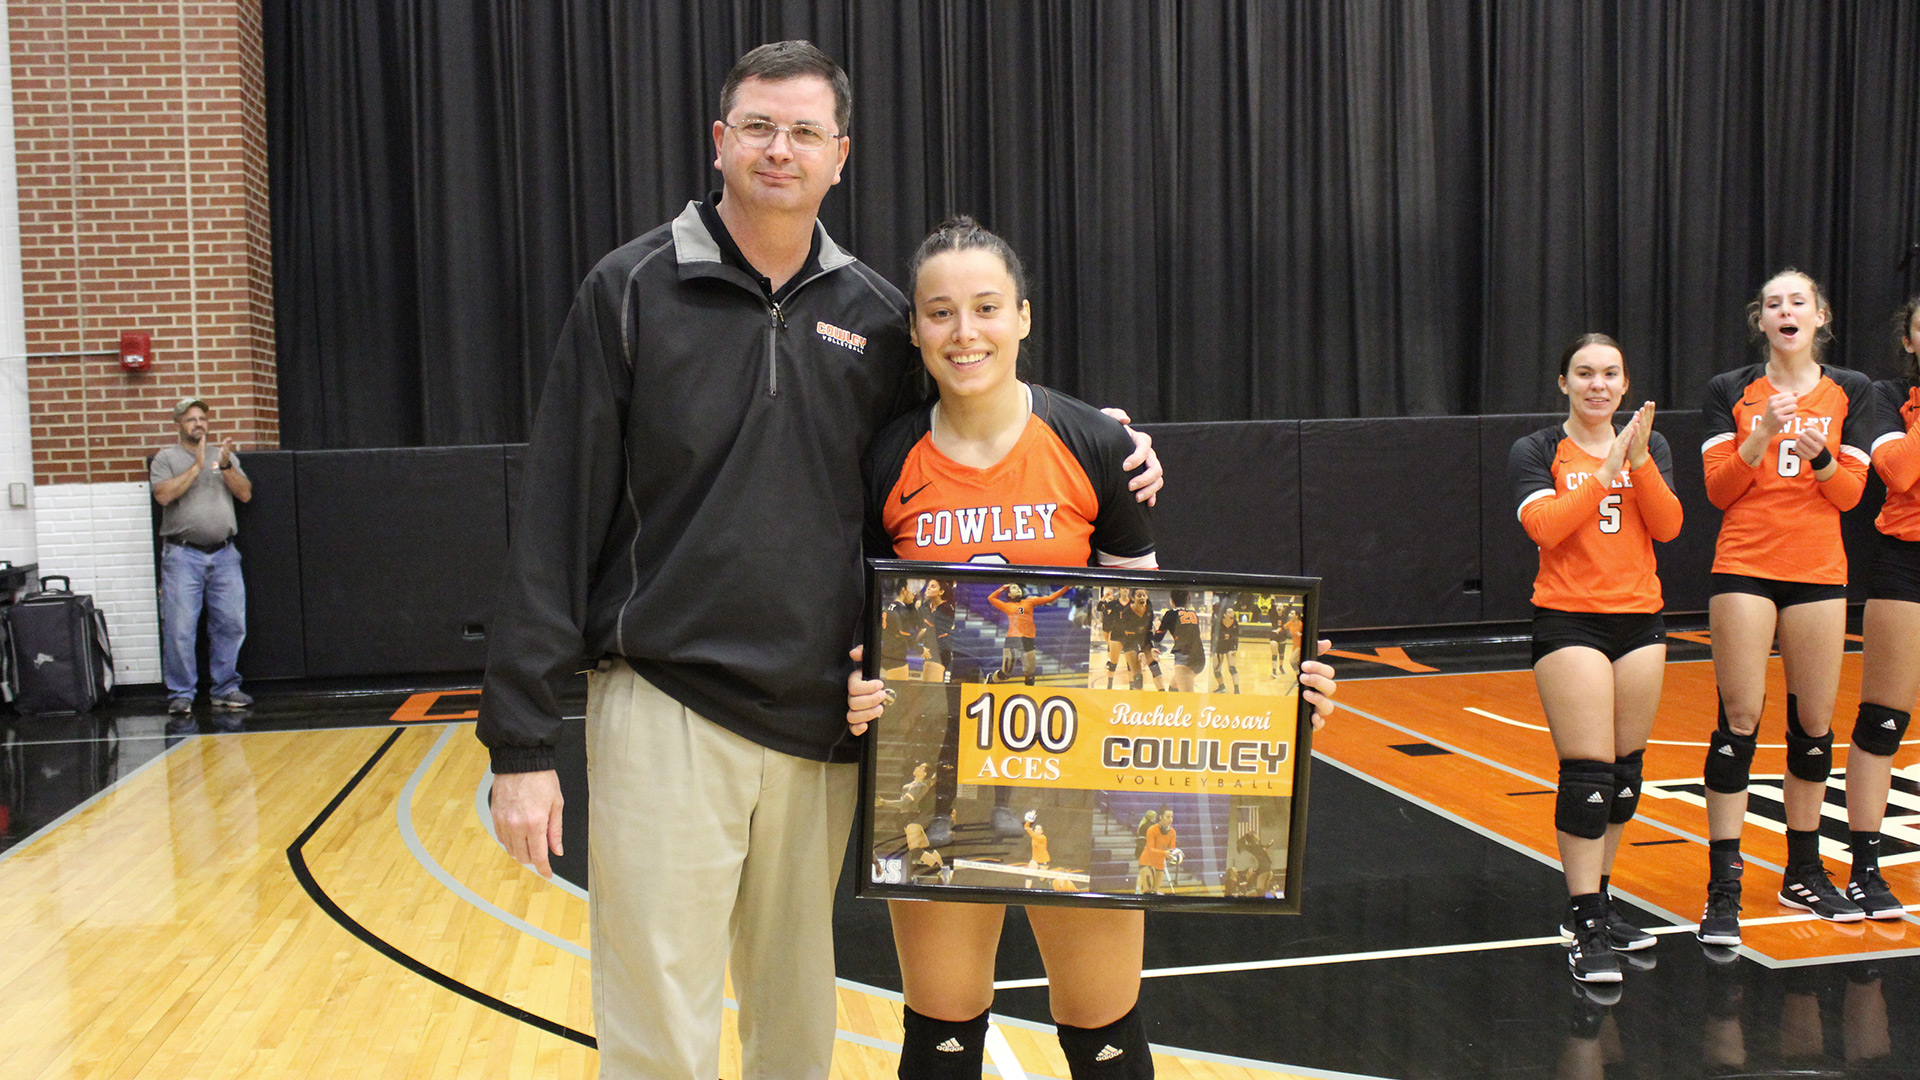 Coach Gream presenting Rachele Tessari with a plaque for reaching 100 career service aces